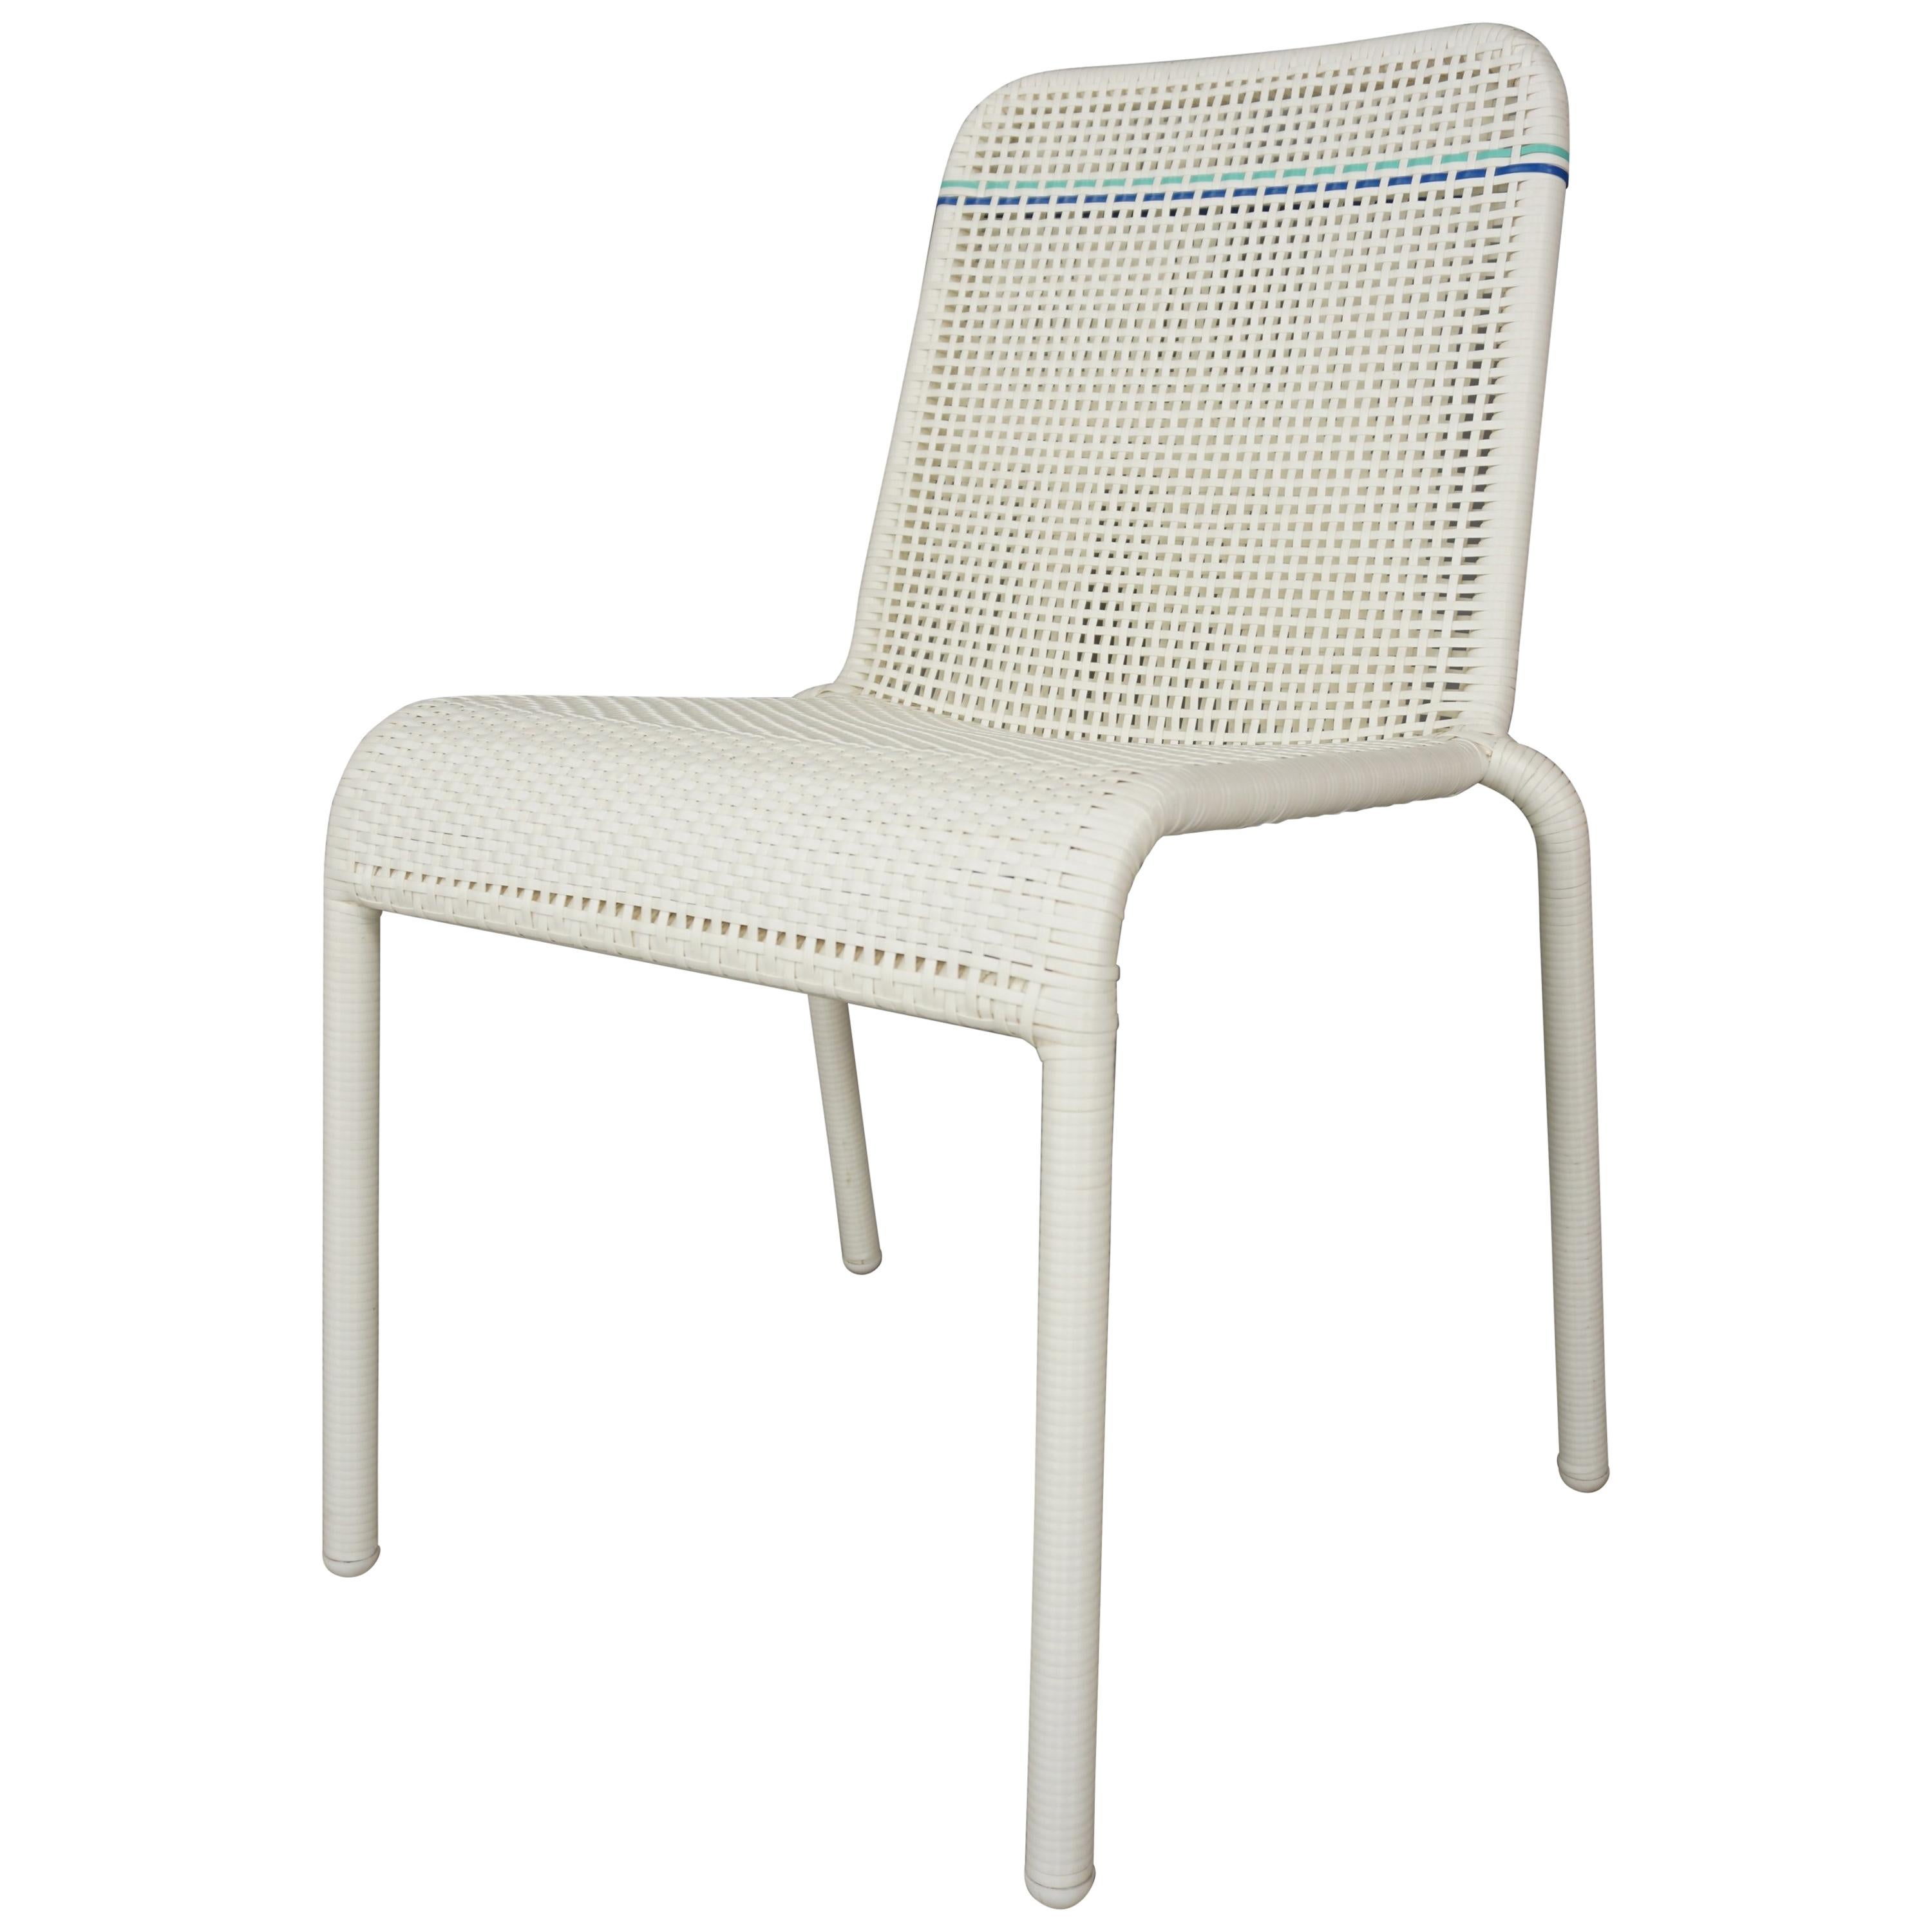 French Design White and Blue Outlined Braided Resin Chair